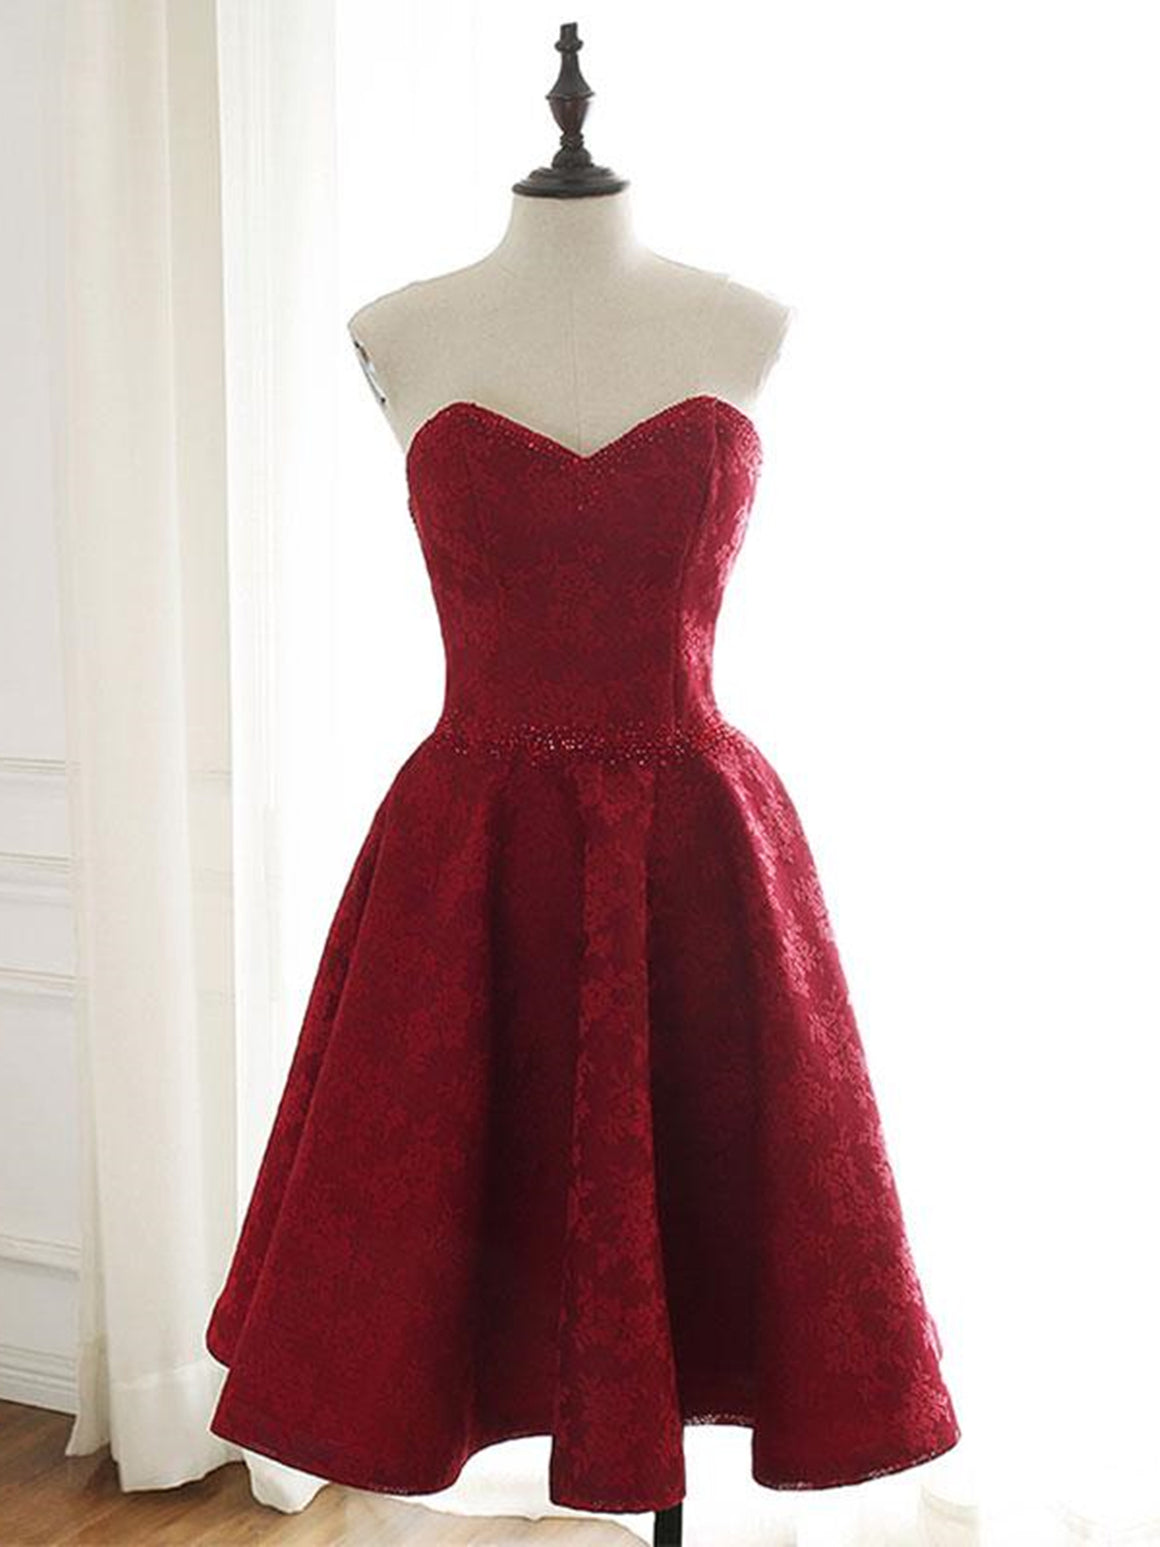 Sweetheart Neck Short Burgundy Lace Prom Dresses, Short Wine Red Lace Formal Evening Dresses